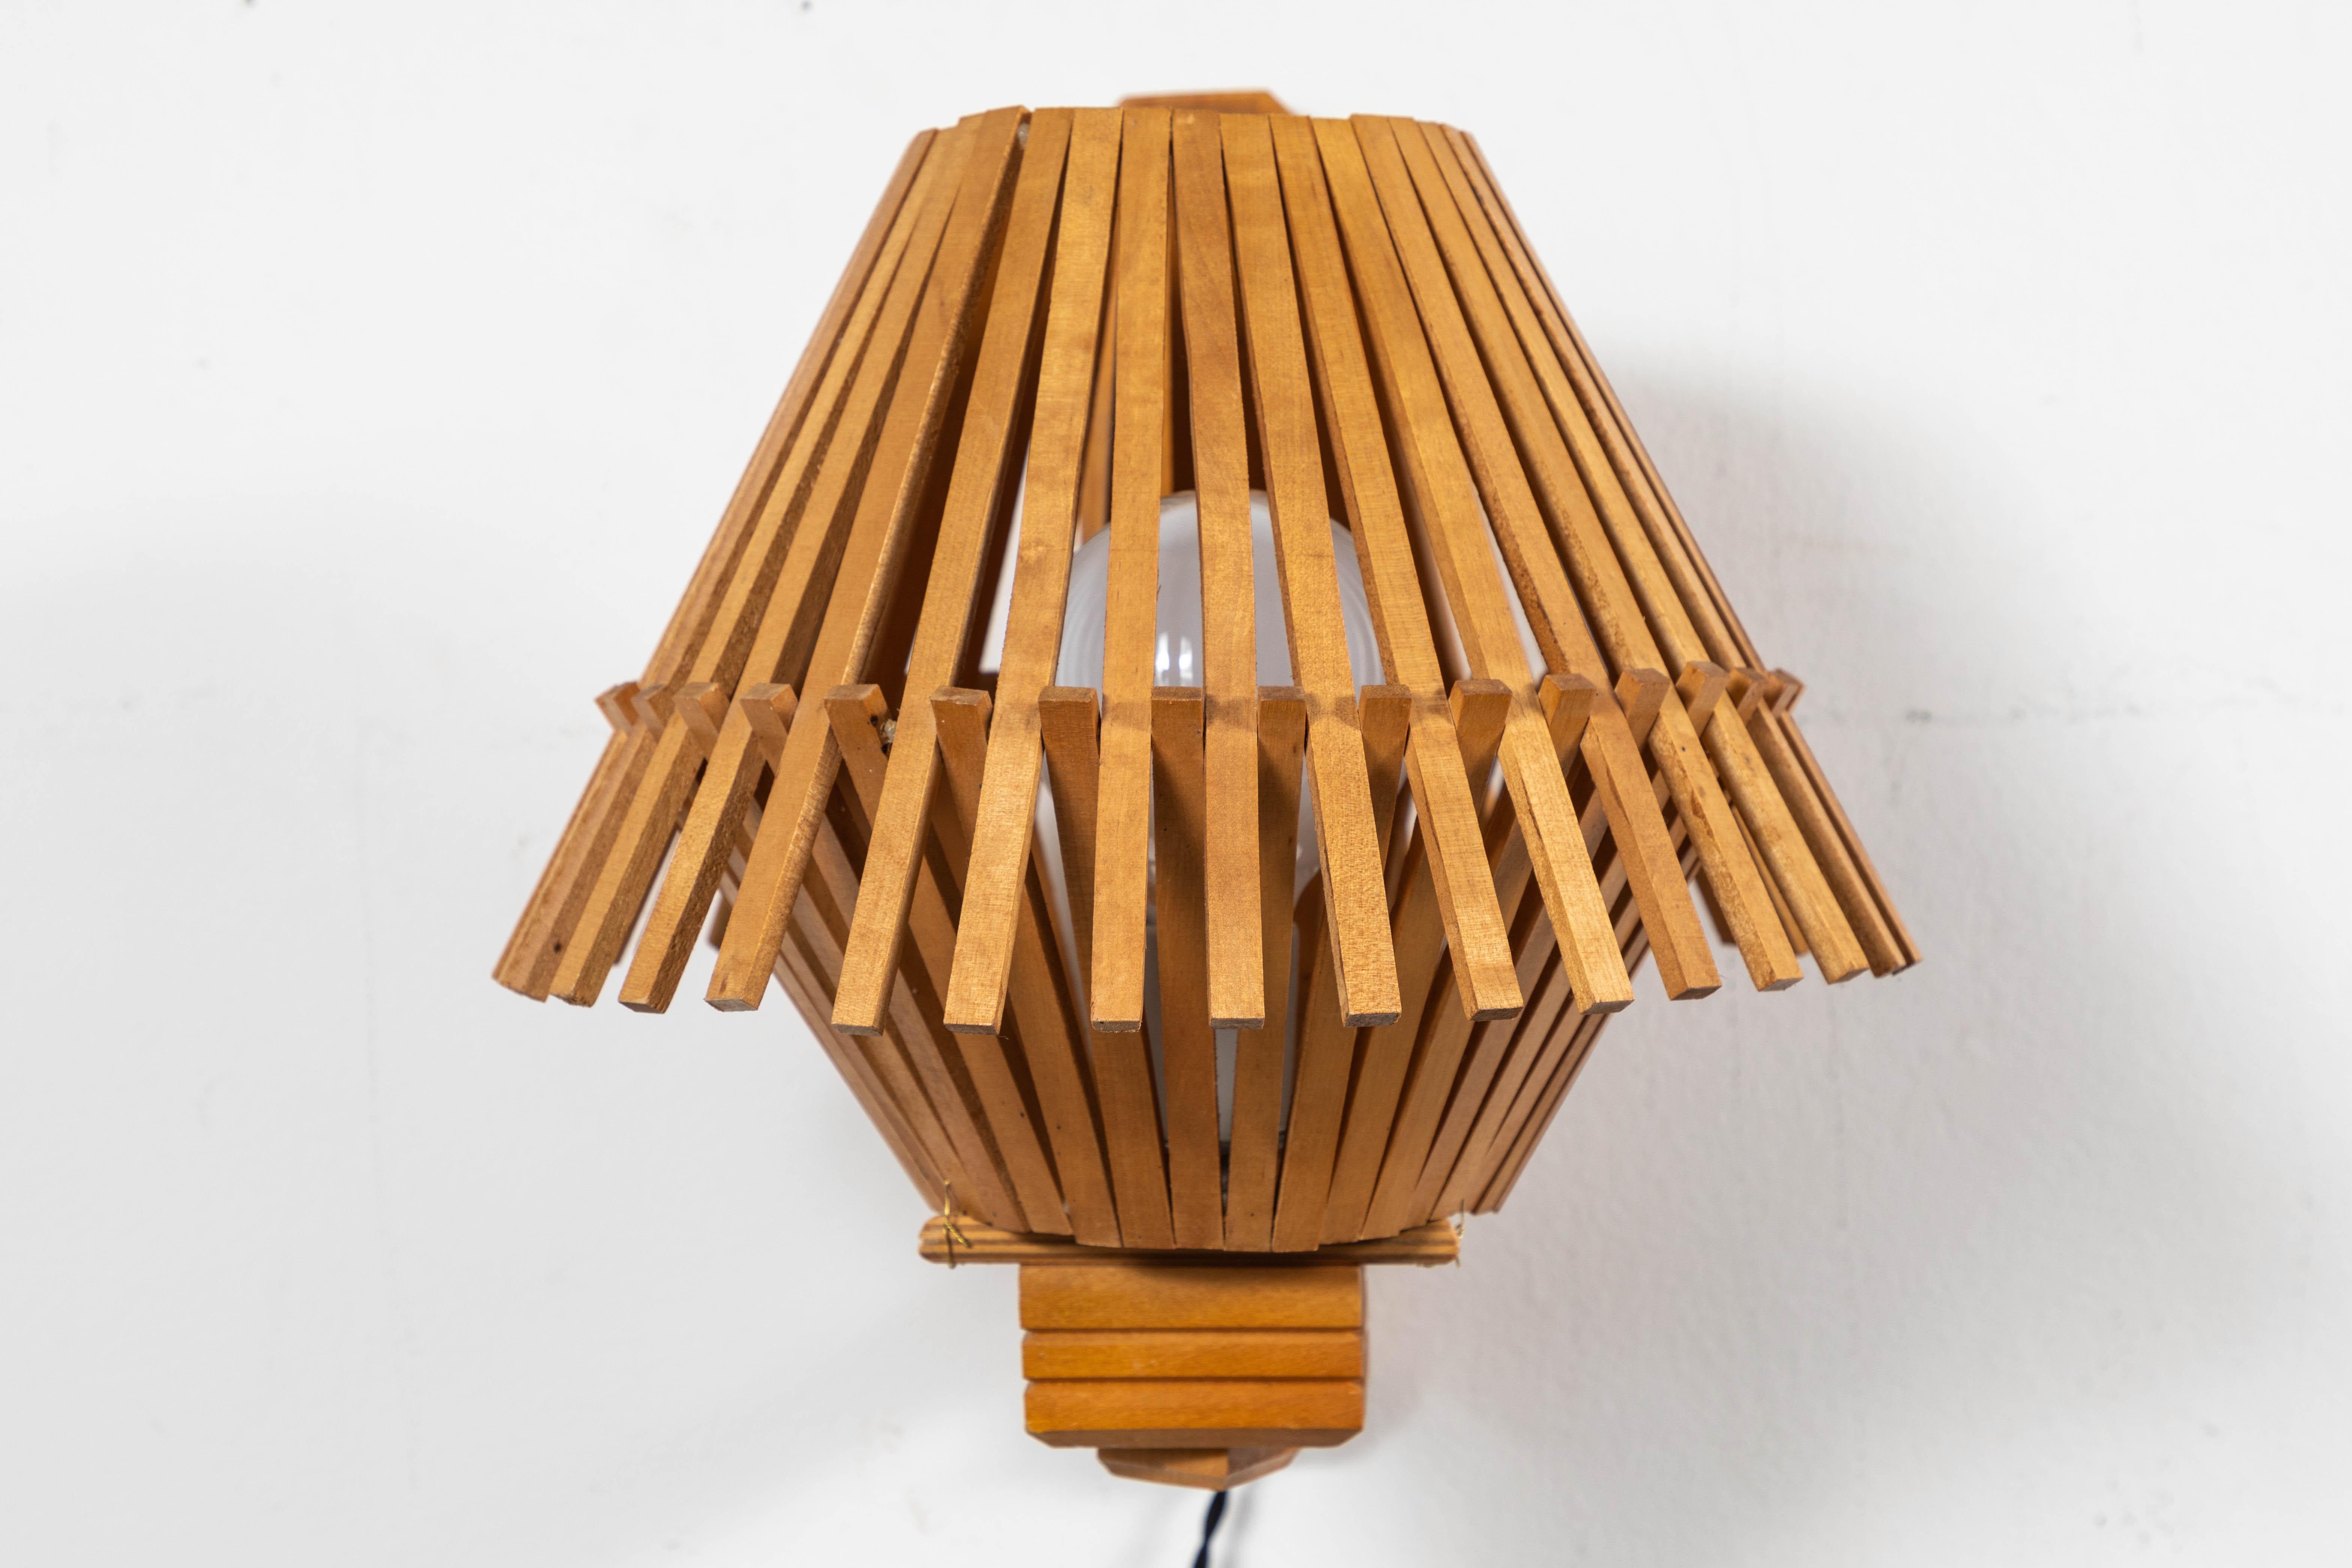 French pair of Geometric angled wood slatted sconces. Plug in with twist switch.